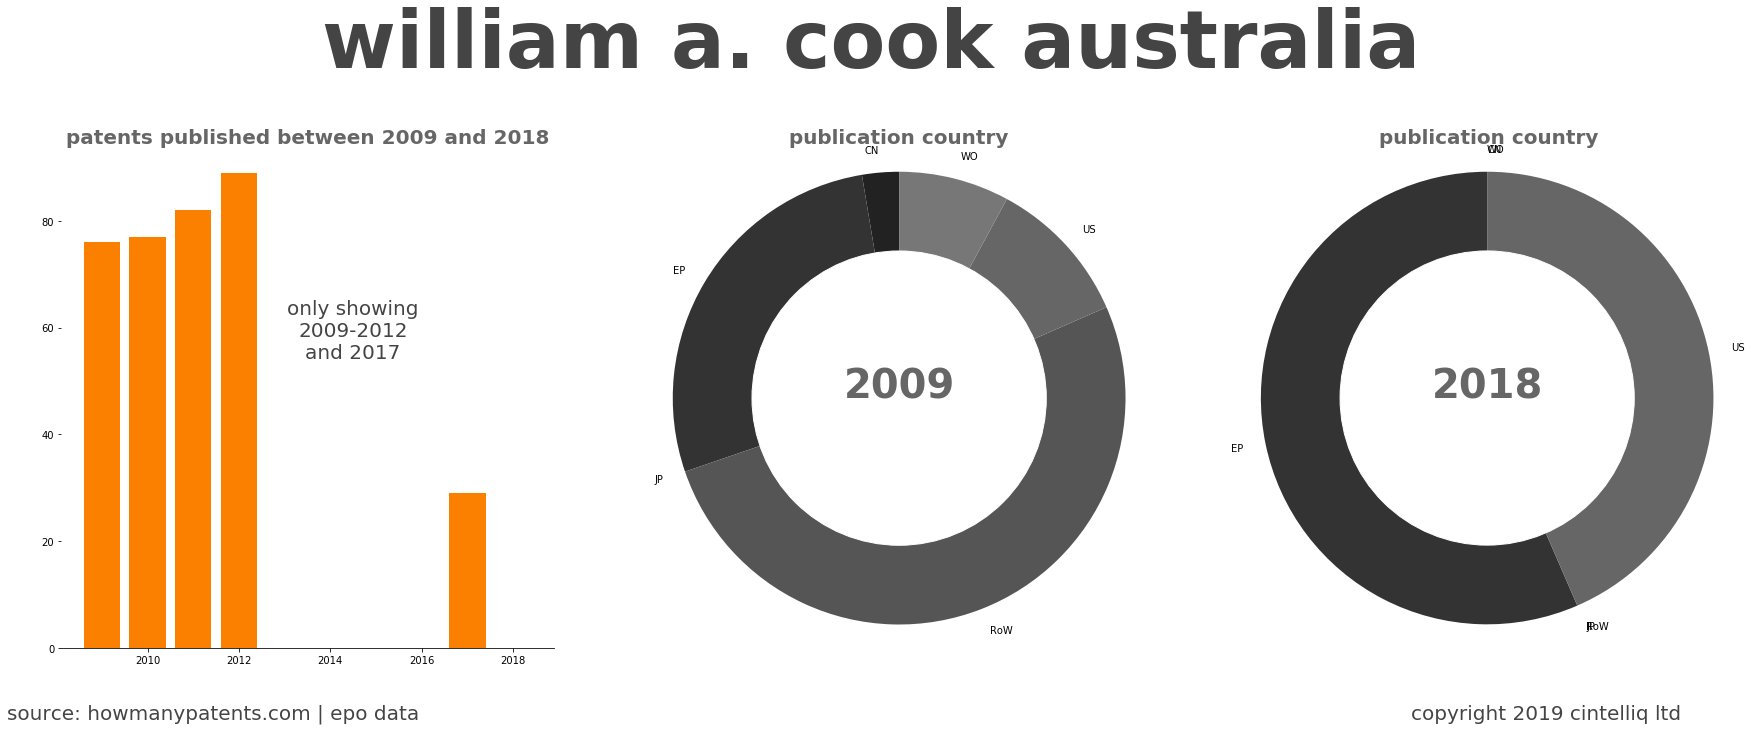 summary of patents for William A. Cook Australia